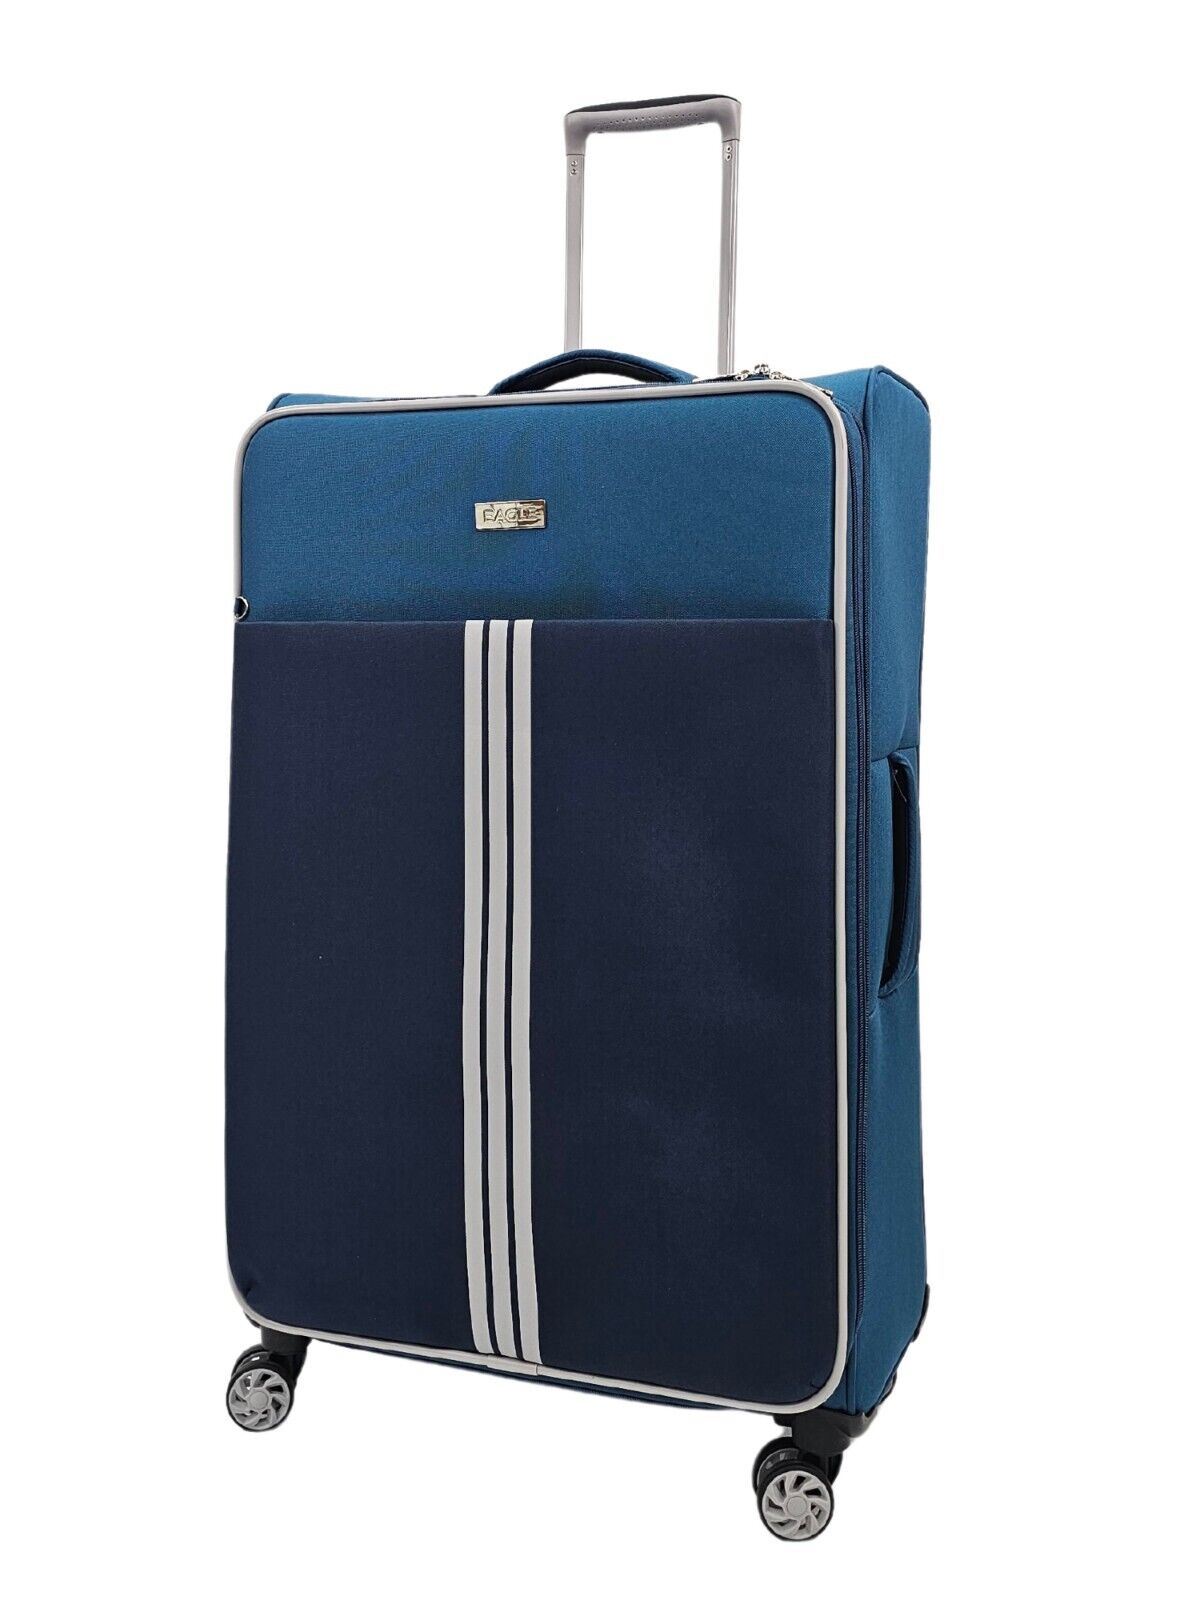 Lightweight  Soft Suitcases 4 Wheel Luggage Travel Bag